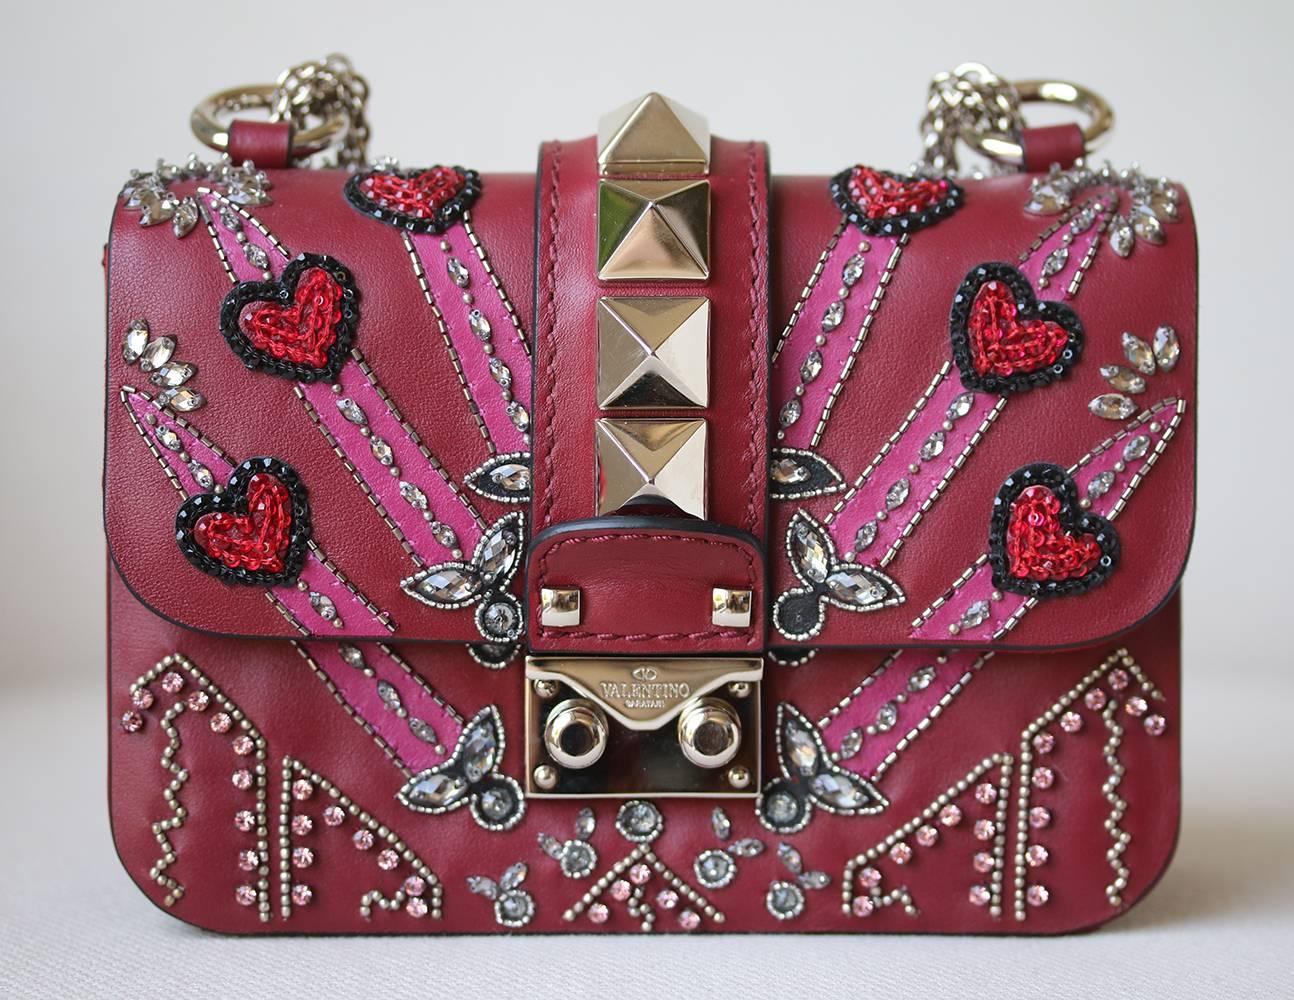 Valentino Garavani And Zandra Rhodes Draw Inspiration From The Label's Archive To Present This Collection With New Seasonal Patterns. Staying Iconic With A Row Of Marcro Rockstuds Along The Centre Front, This Crossbody Depicts The Label's Dark